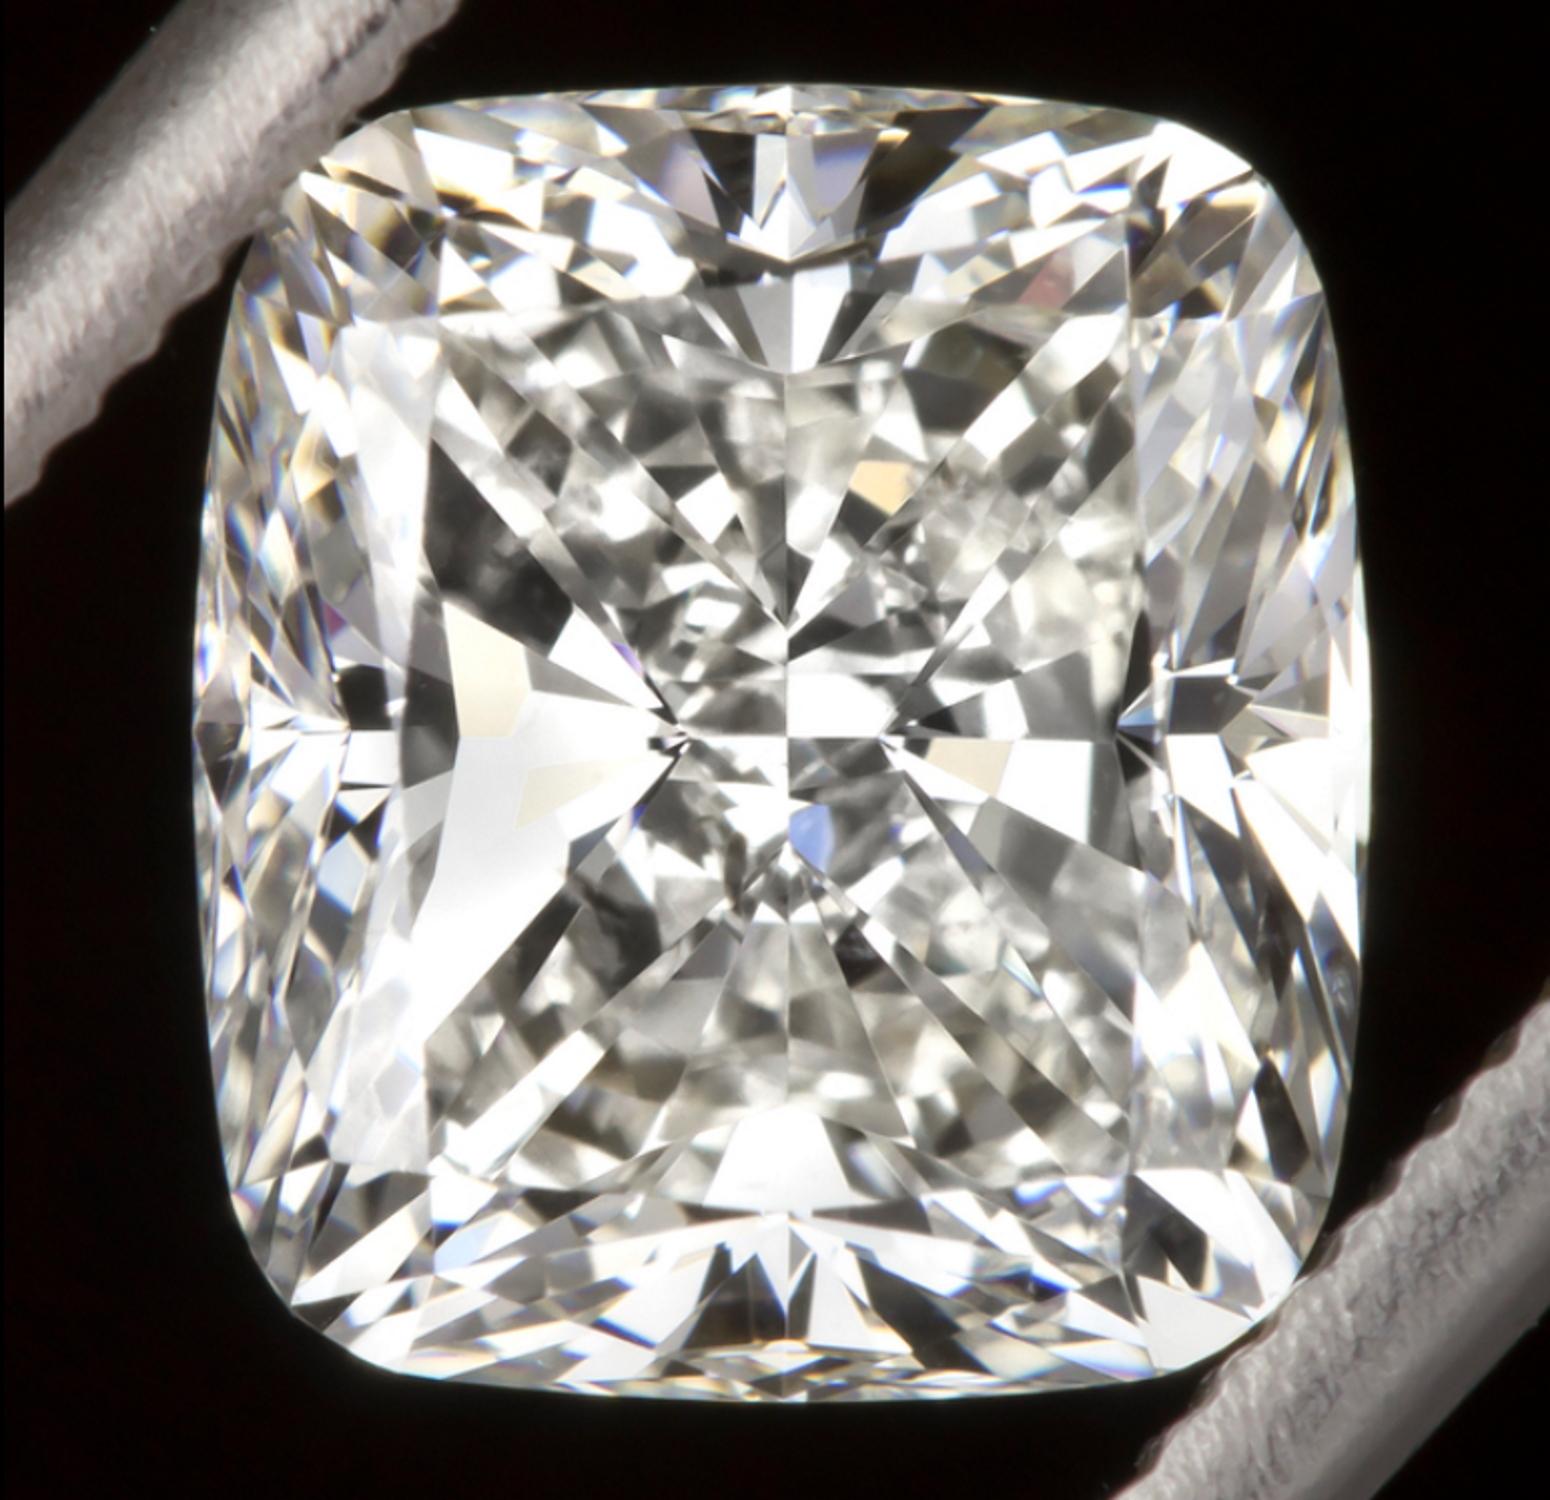 This excellent quality 2 carat diamond is certified by GIA, The world's most respected lab. The diamond is graded H for color, and it faces up beautifully white with no yellow. There are no brown, green or milky shades and no cloudiness. The